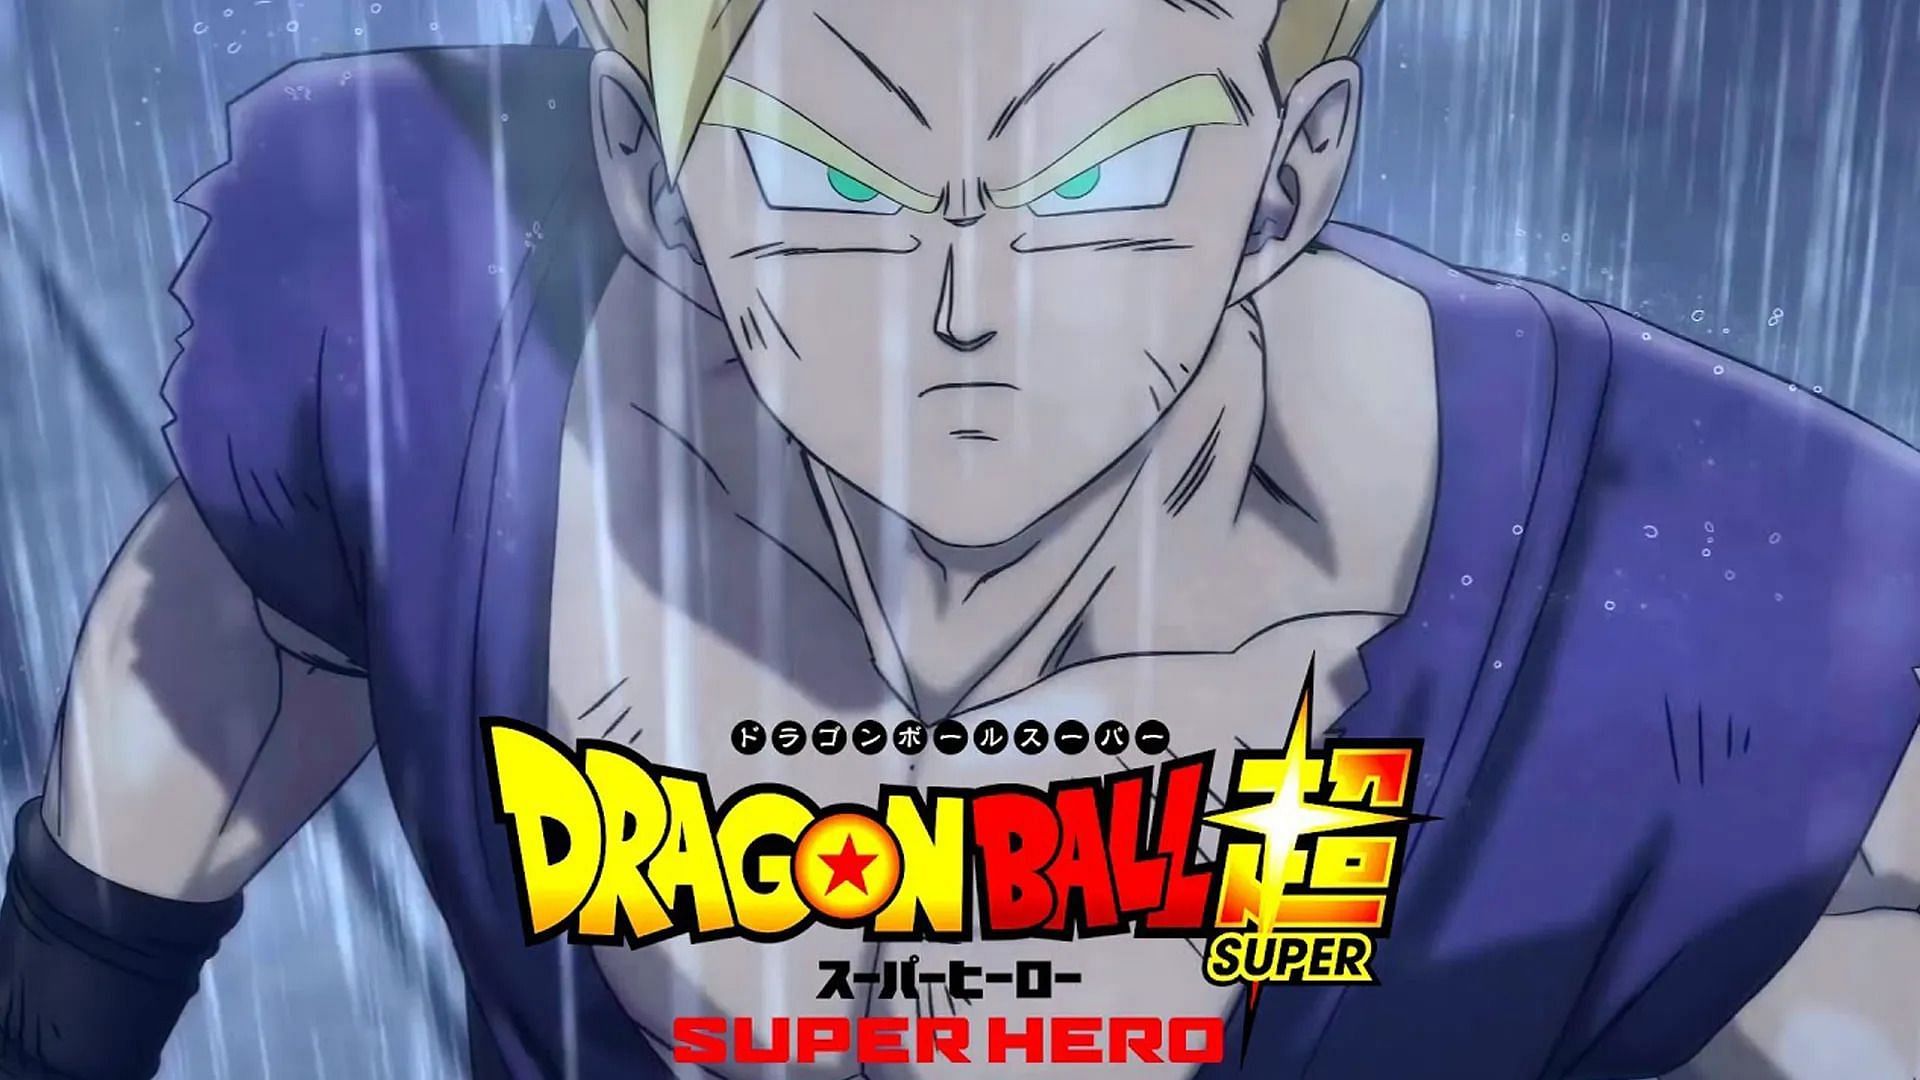 Dragon Ball Super: Super Hero Spoilers Reveal Everything From New Forms To Long Awaited Victories